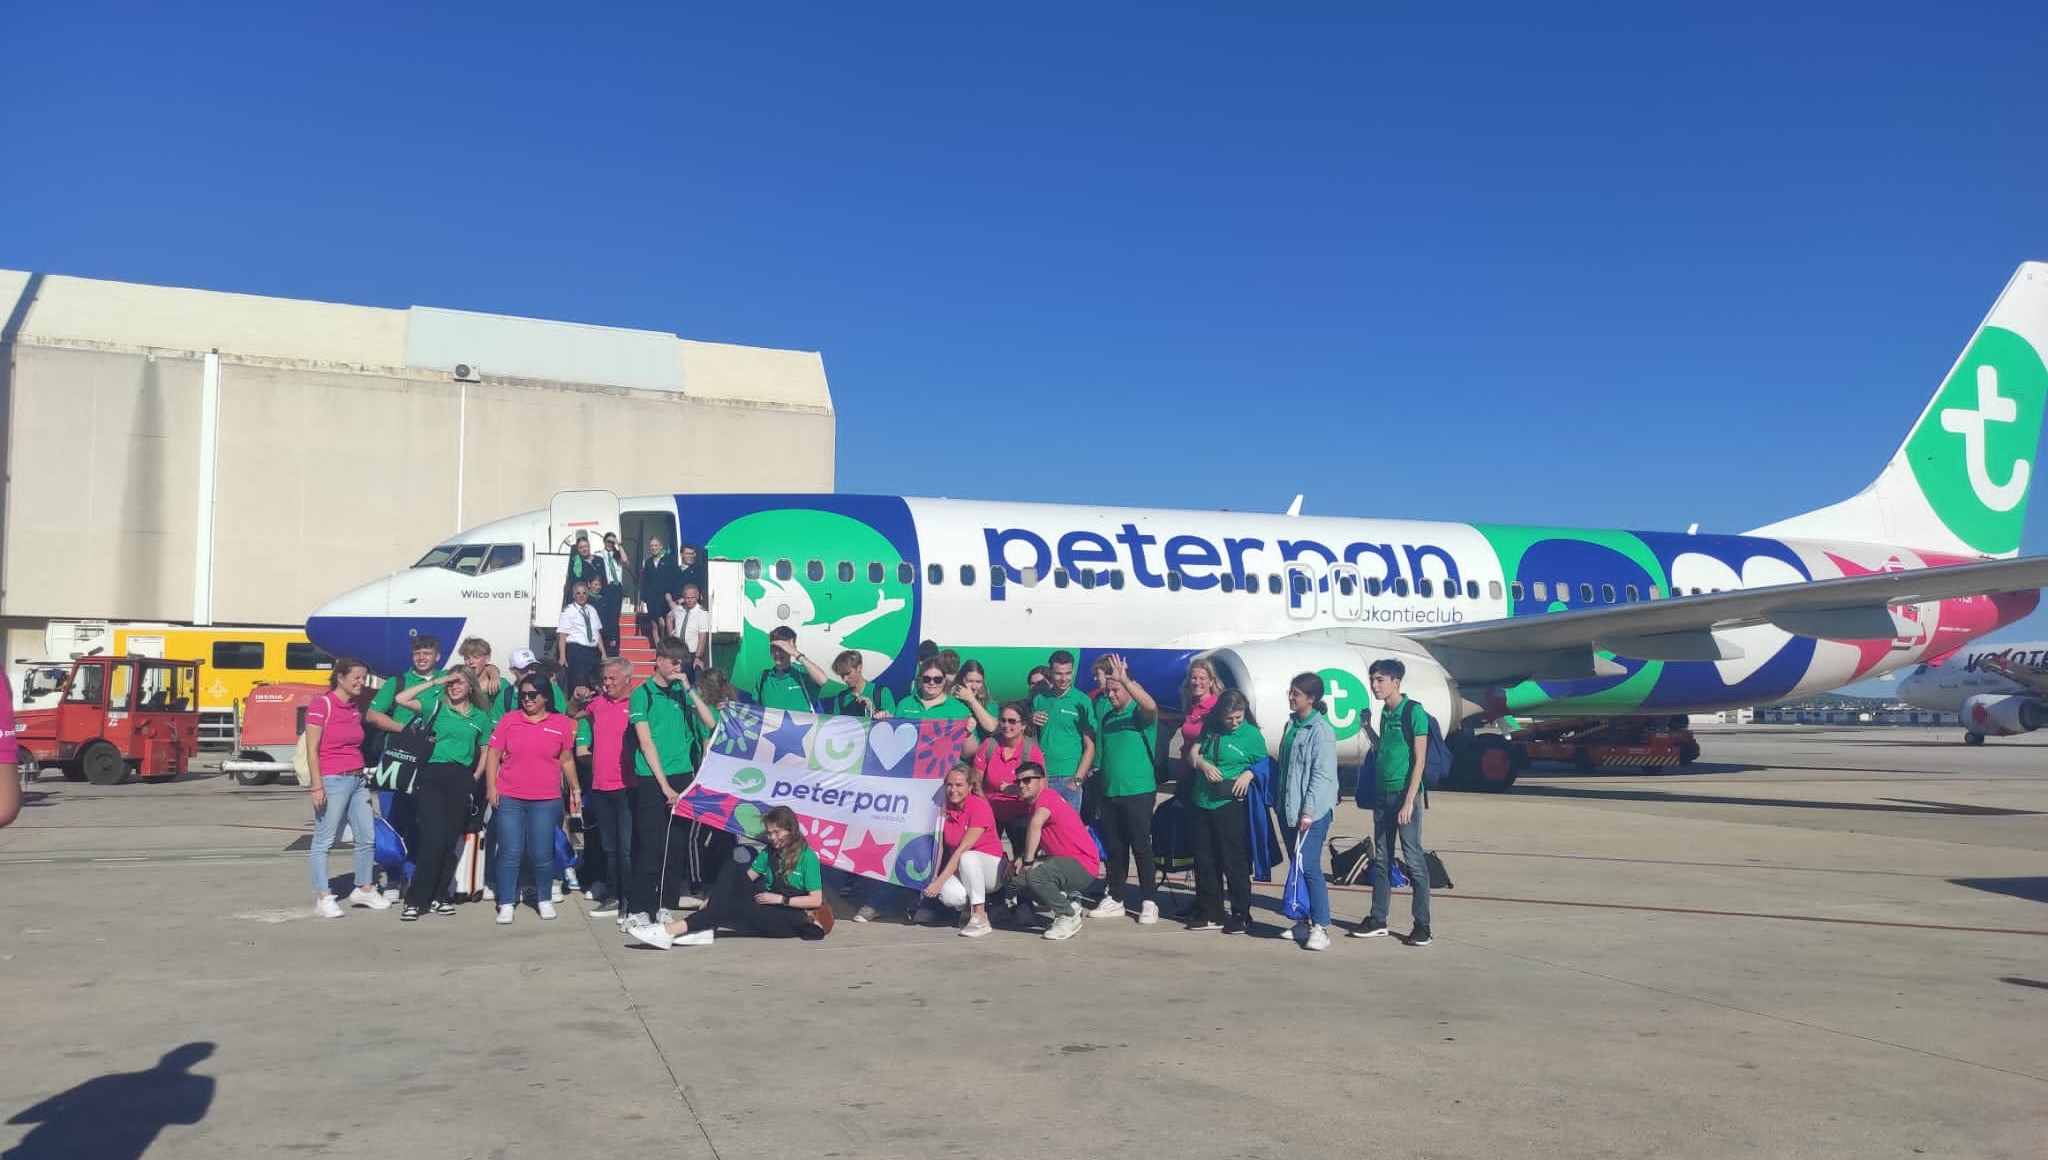 Colleagues from Mallorca attend a very special Peter Pan Holiday Club plane